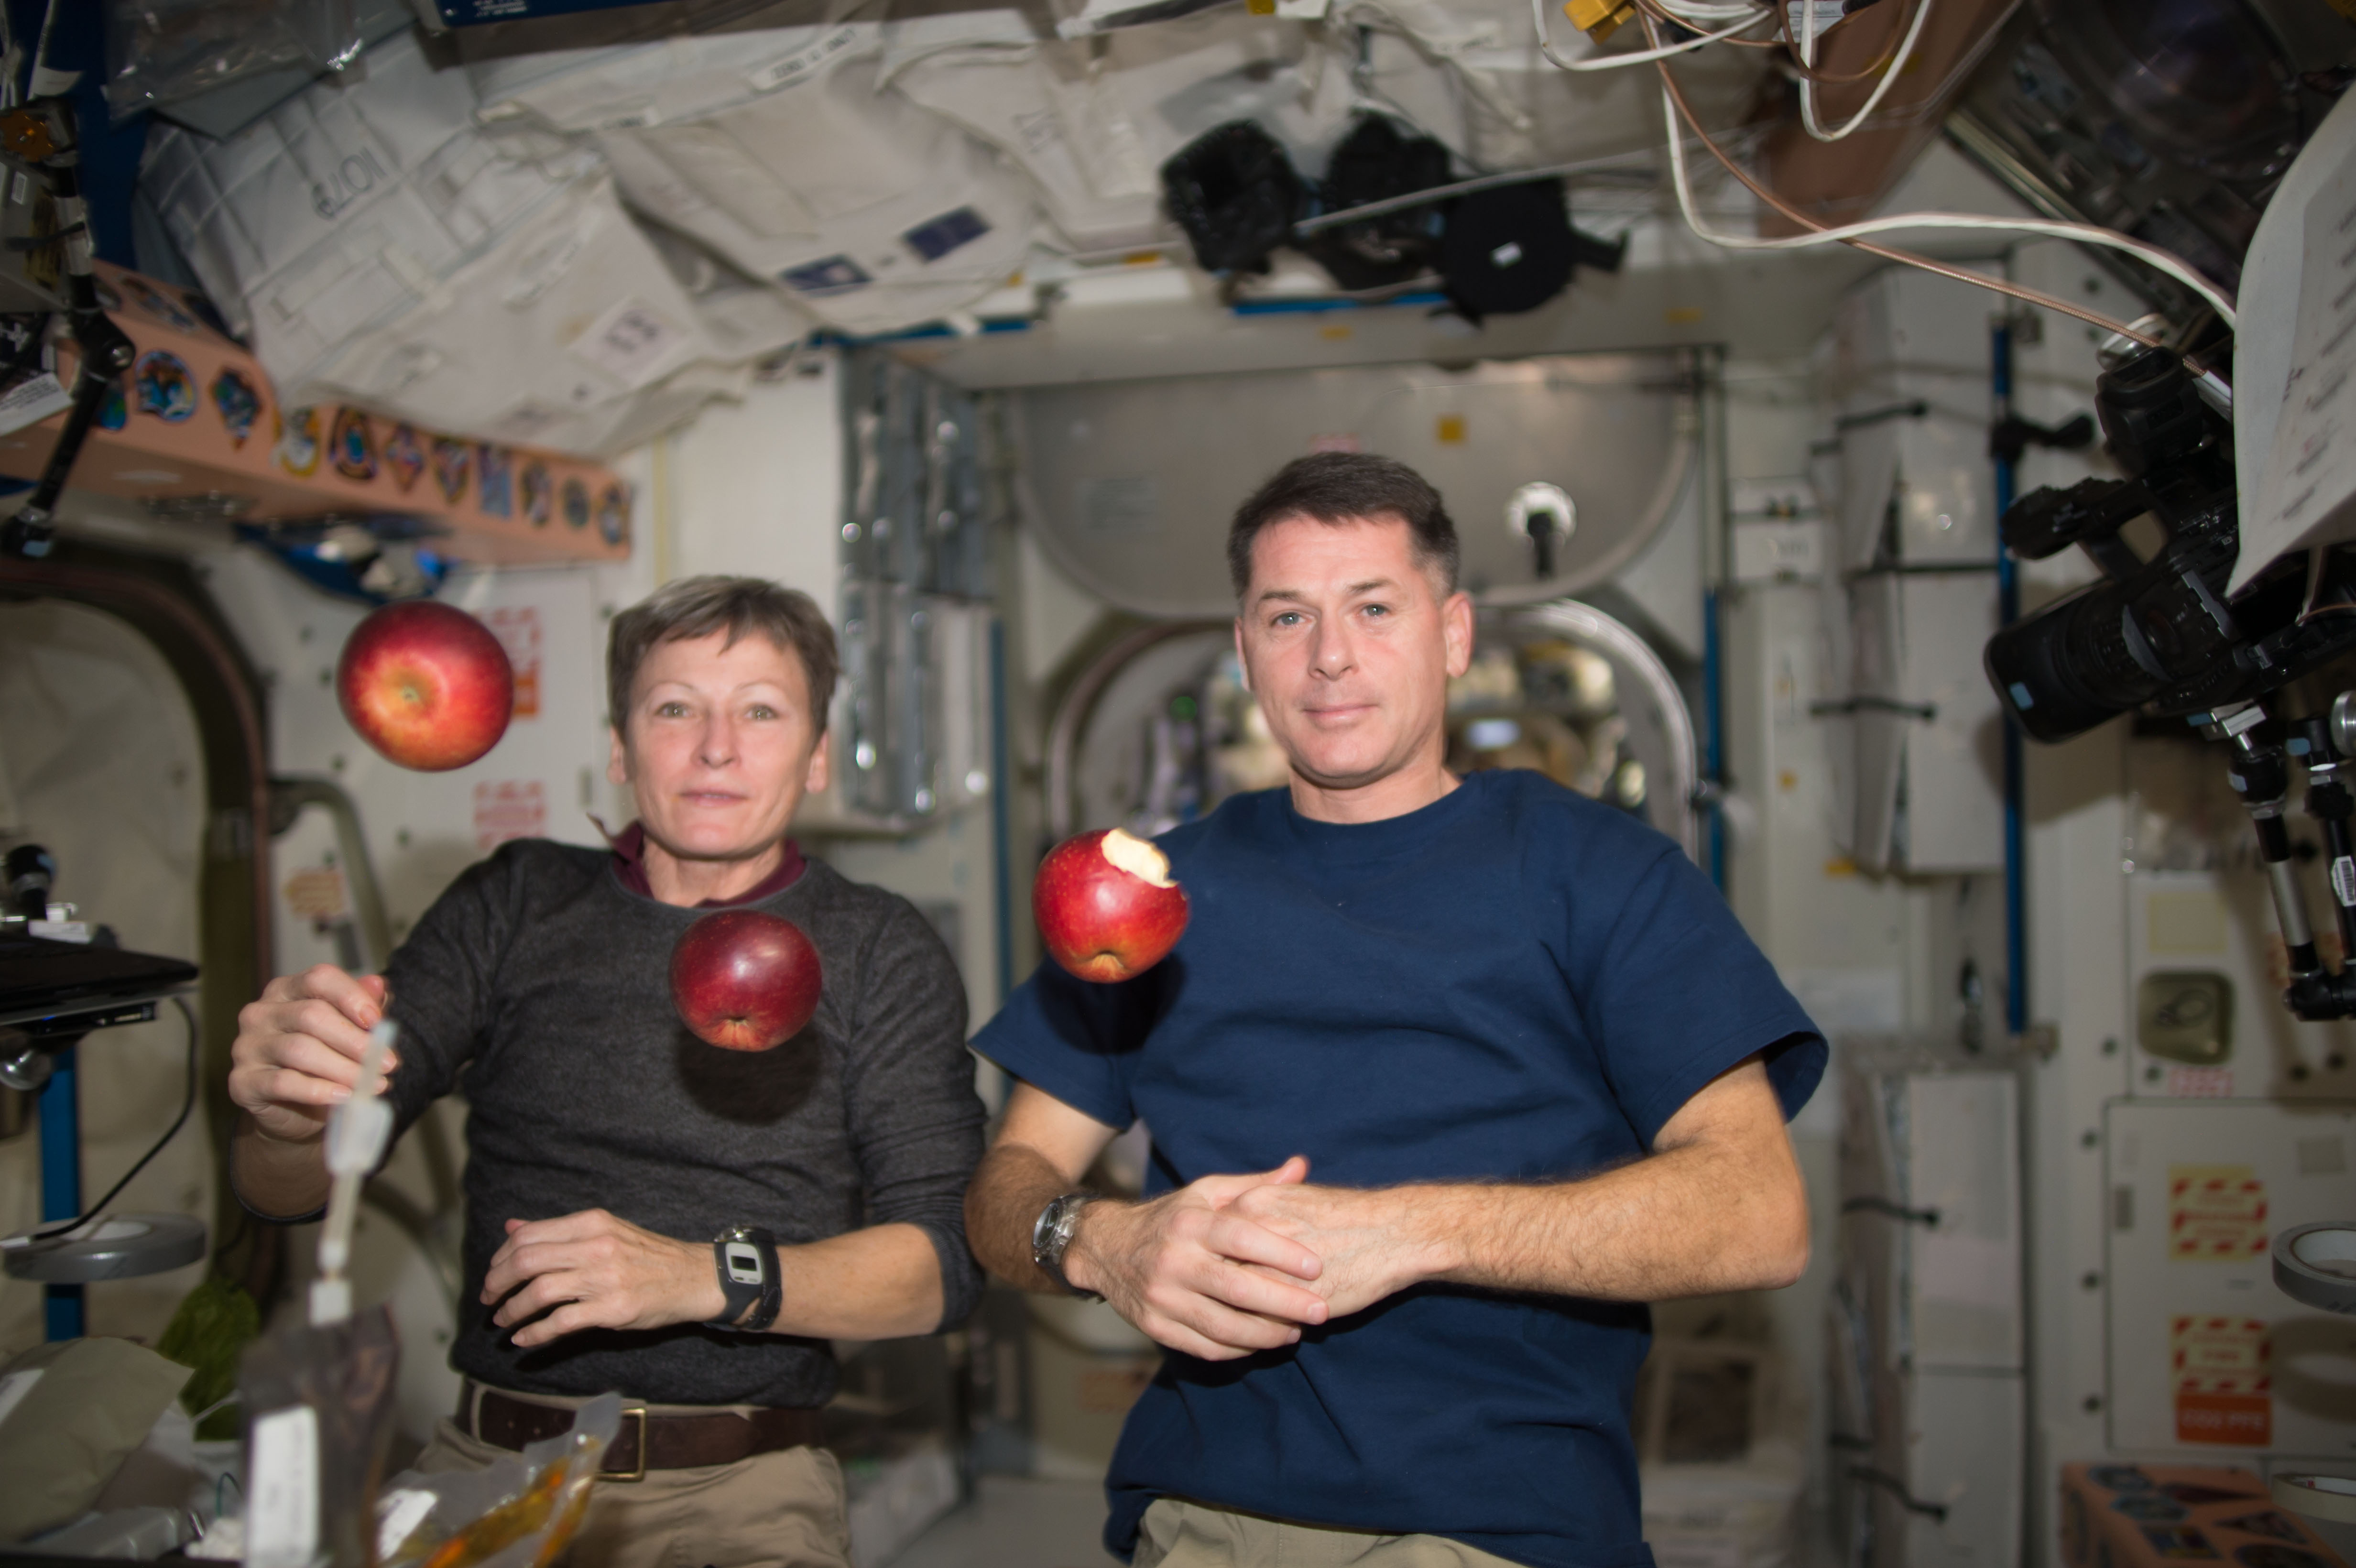 ISS-50 Peggy Whitson and Shane Kimbrough with apples in the Unity node